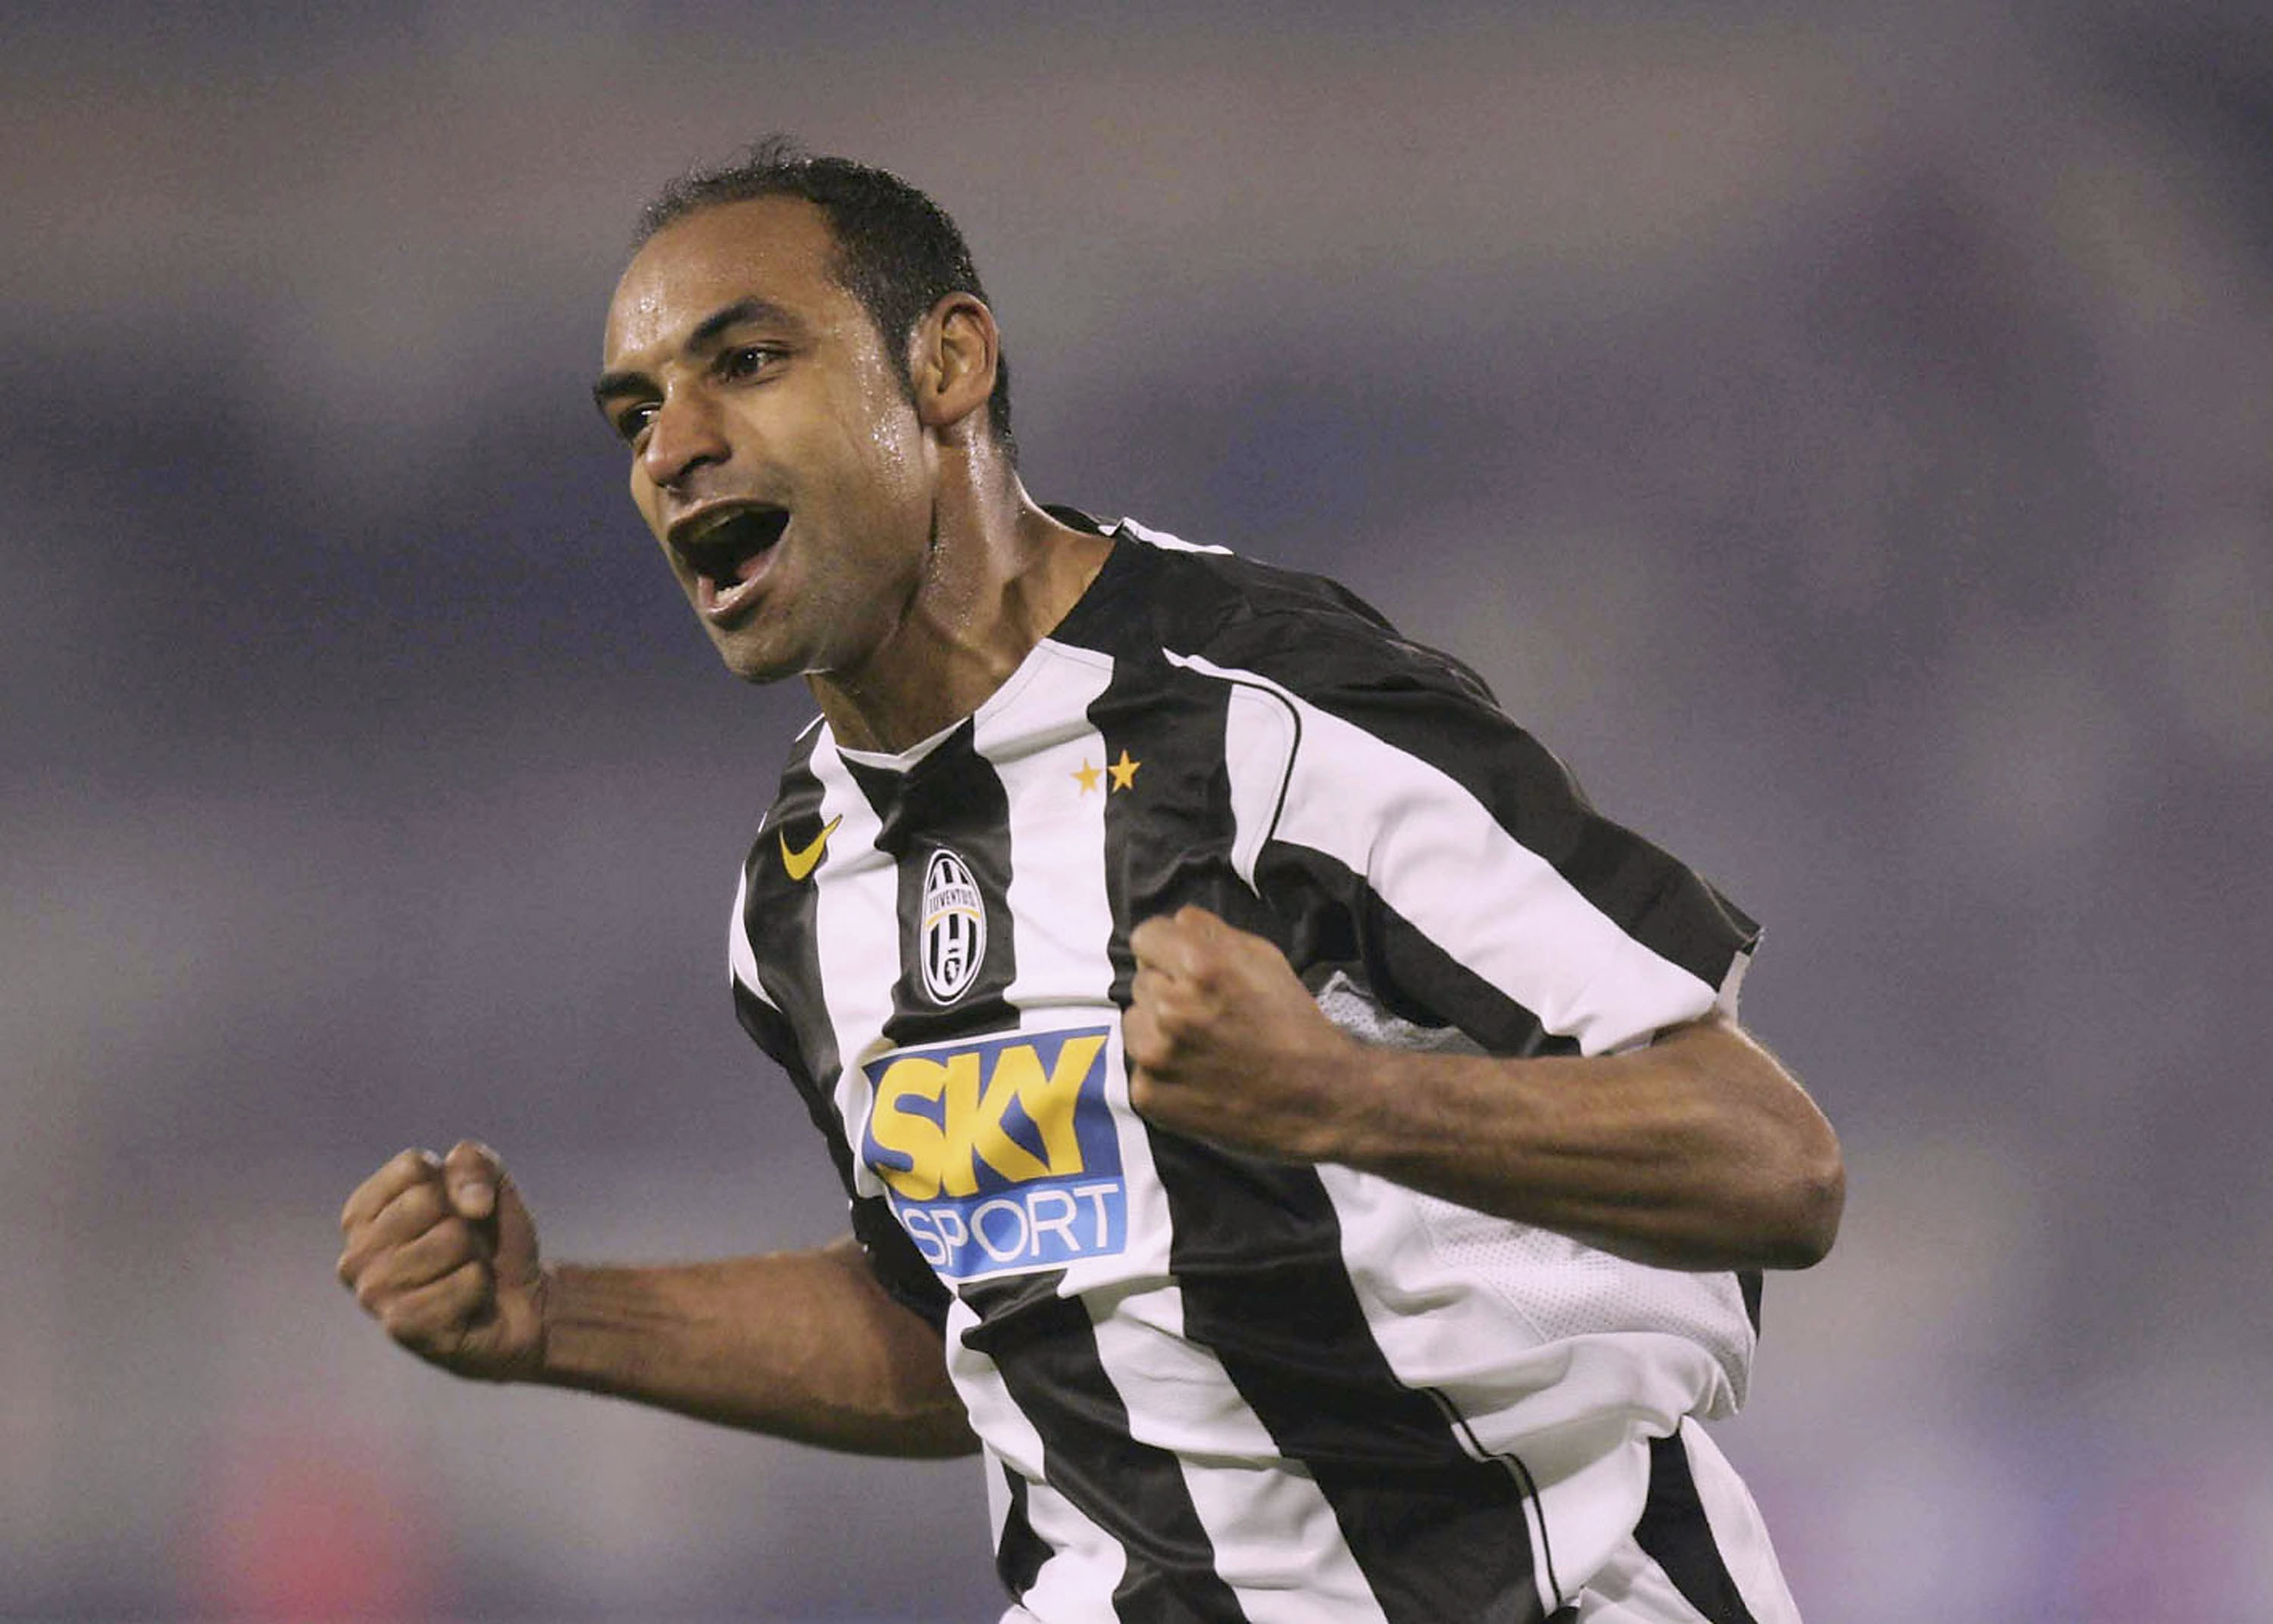 Emerson celebrates after scoring for Juventus against Cagliari in January 2005.